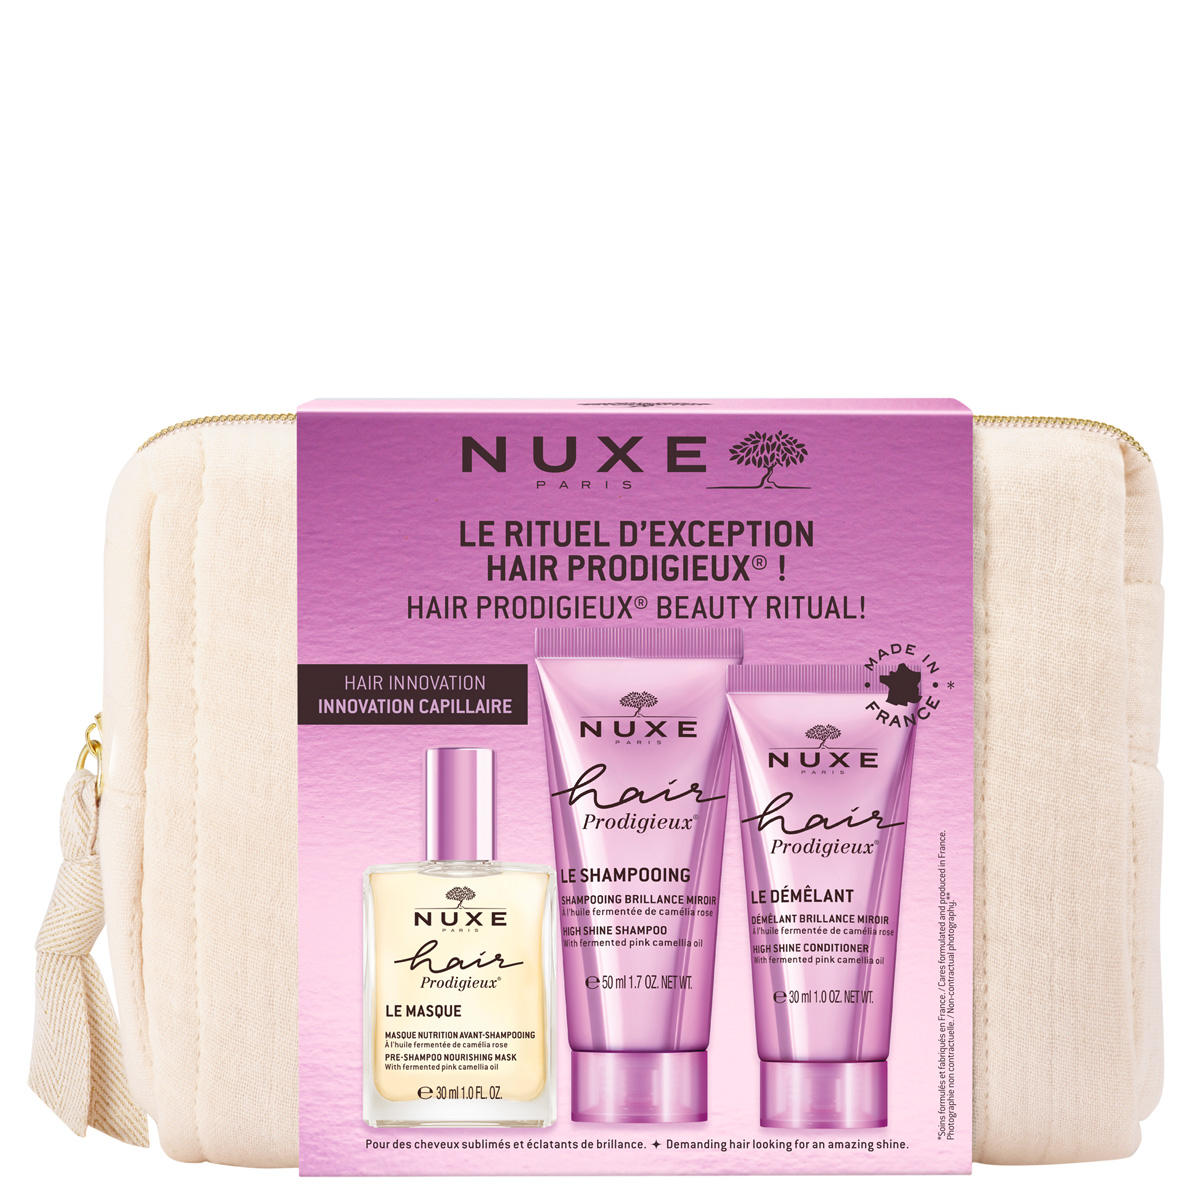 NUXE Hair Prodigieux Getting to know set  - 1